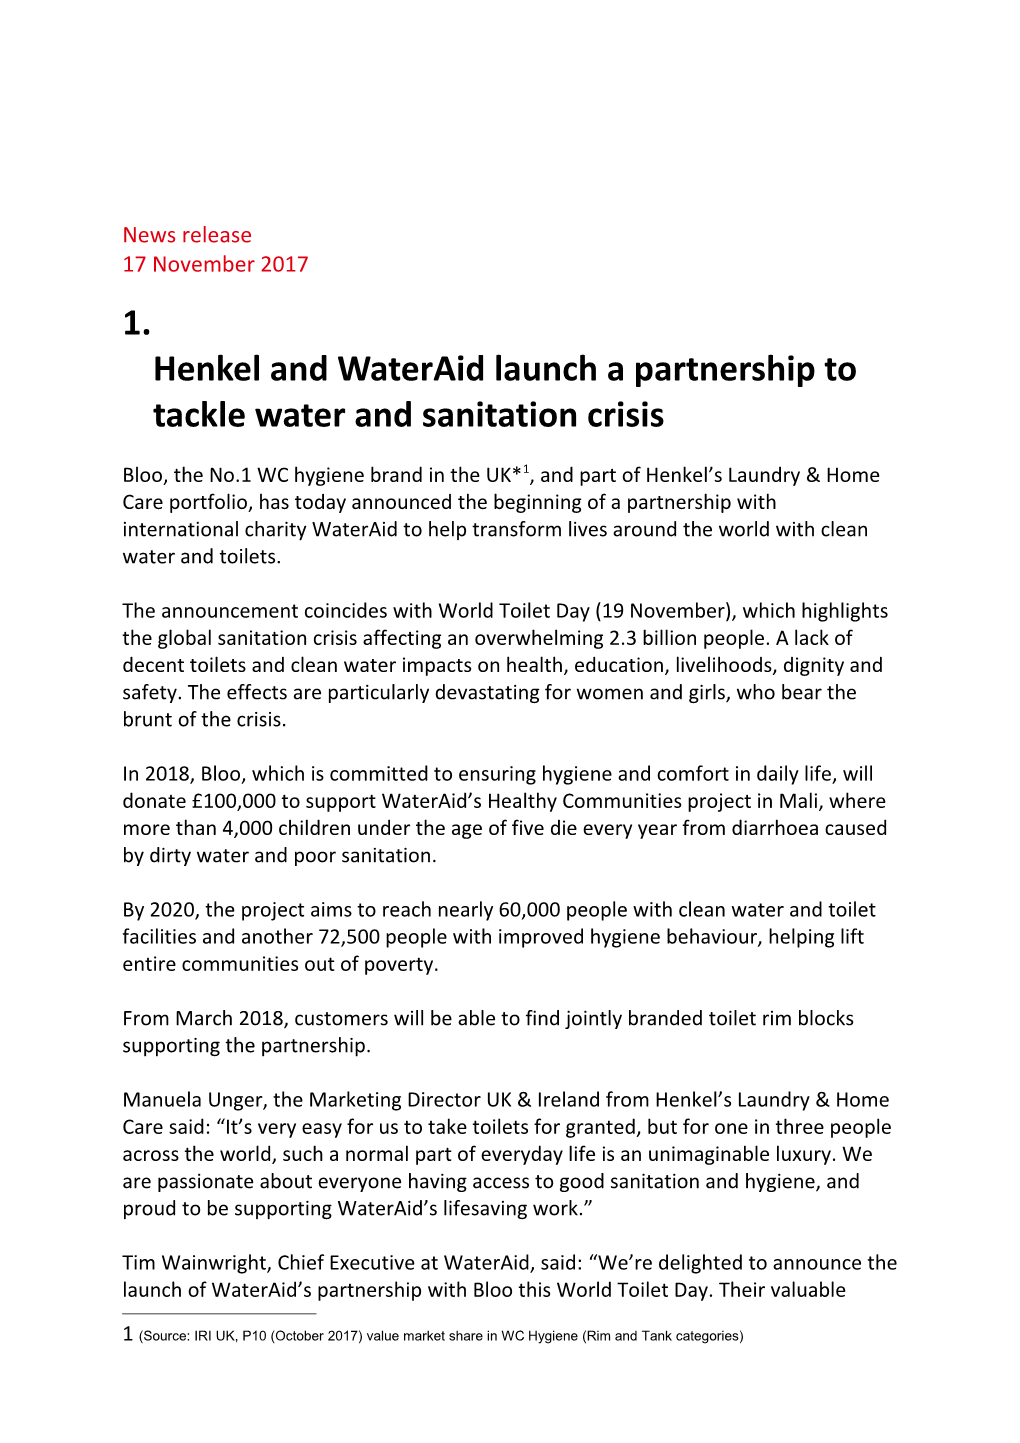 Henkel and Wateraid Launch a Partnership to Tackle Water and Sanitation Crisis